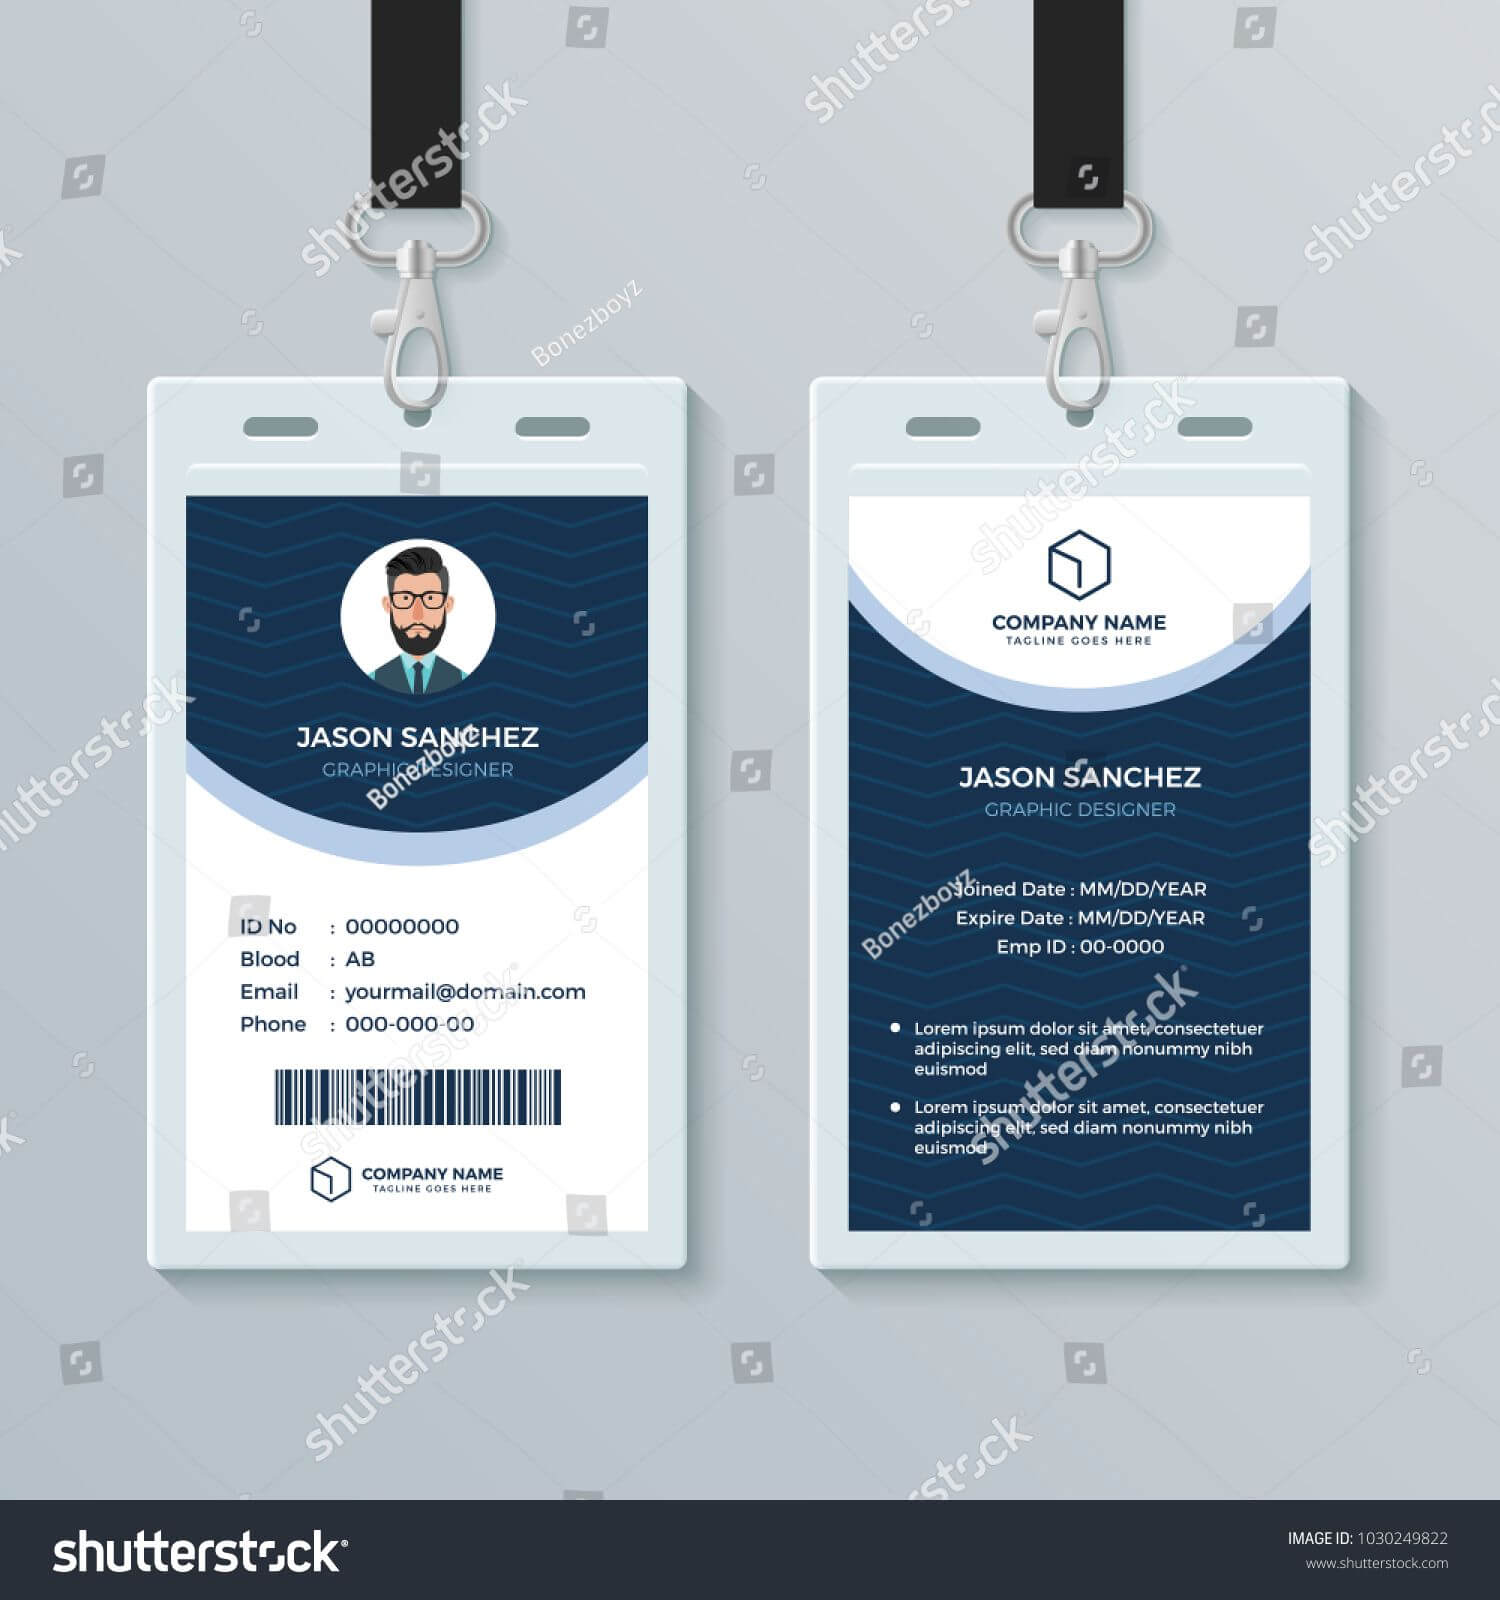 This Id Card Template Perfect For Any Types Of Agency Within Company Id Card Design Template